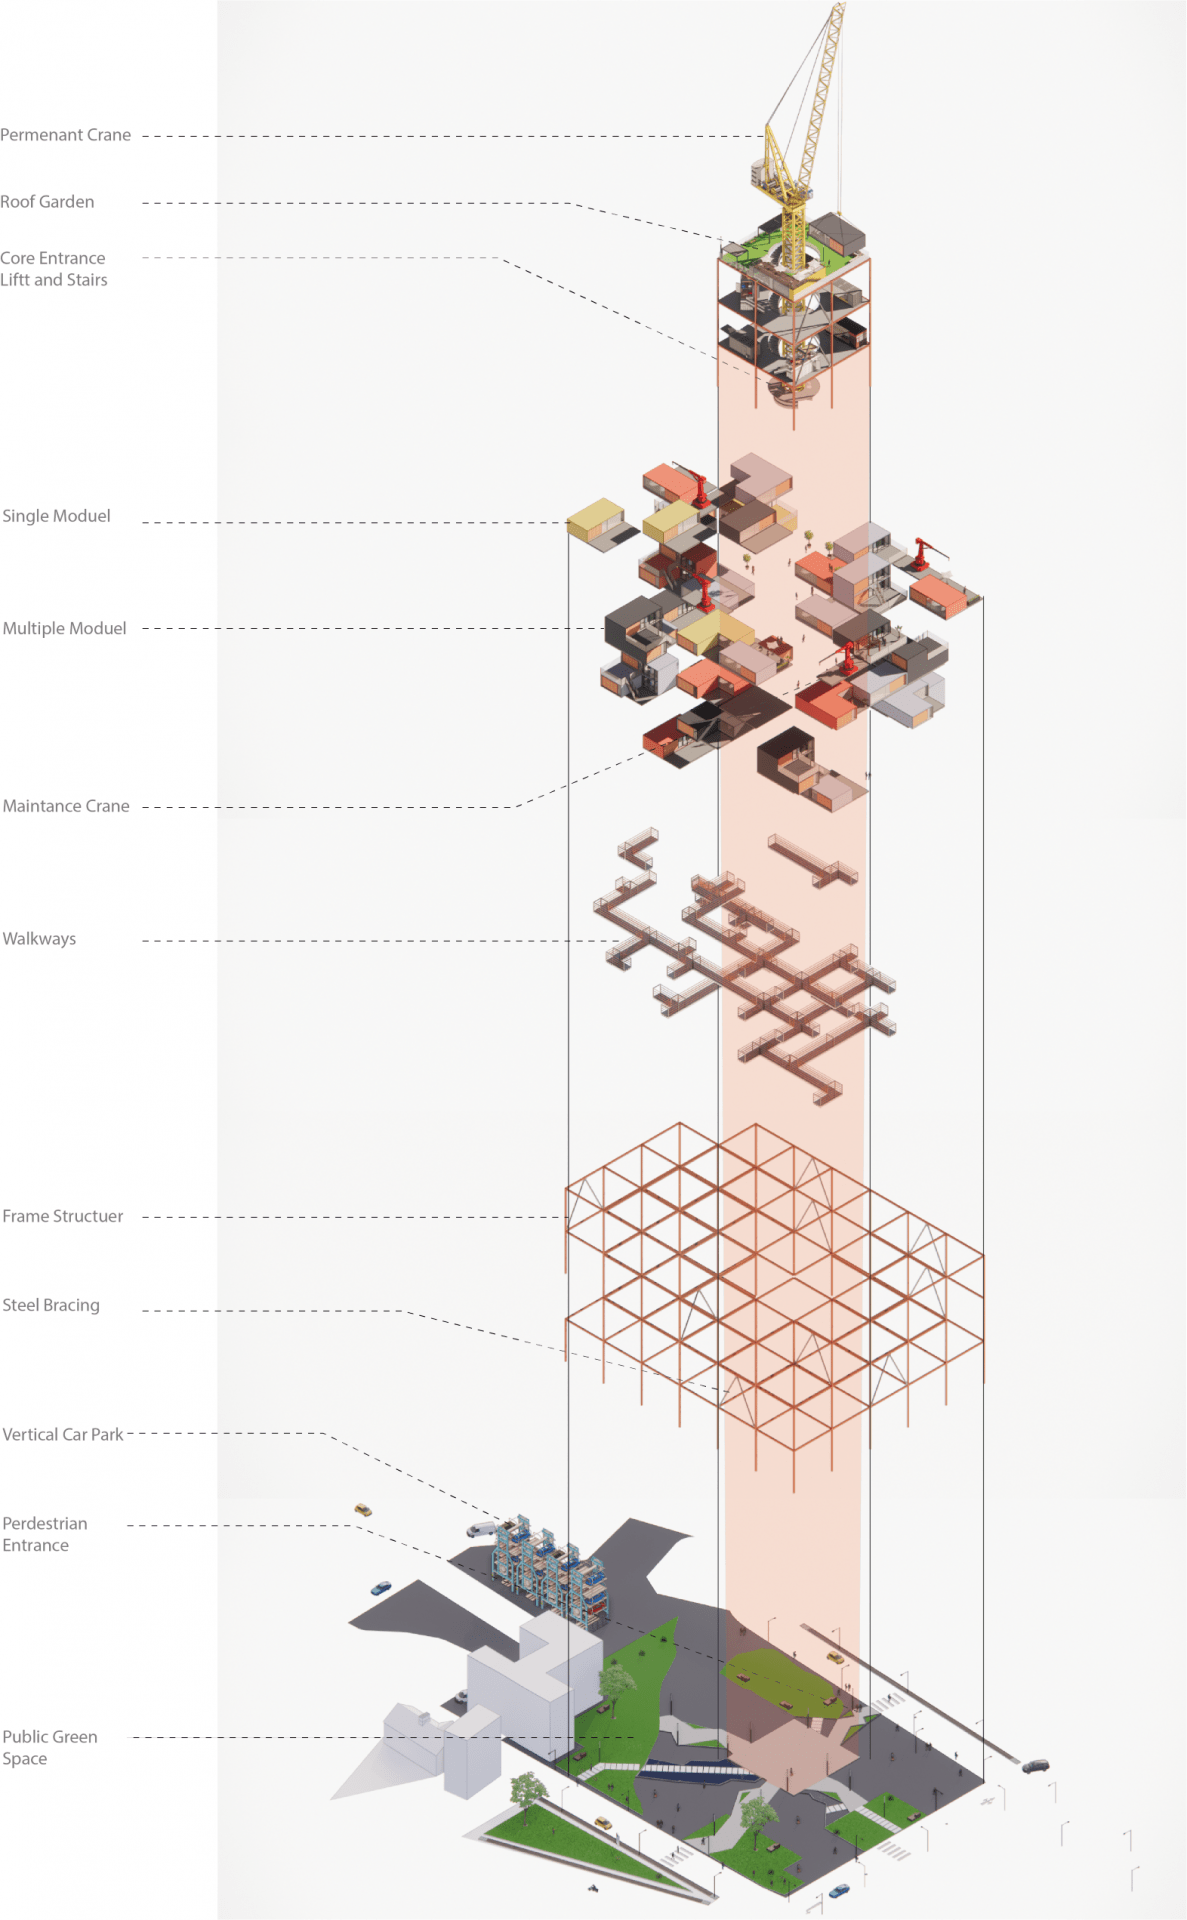 Exploded diagram showing the modular structure of the development